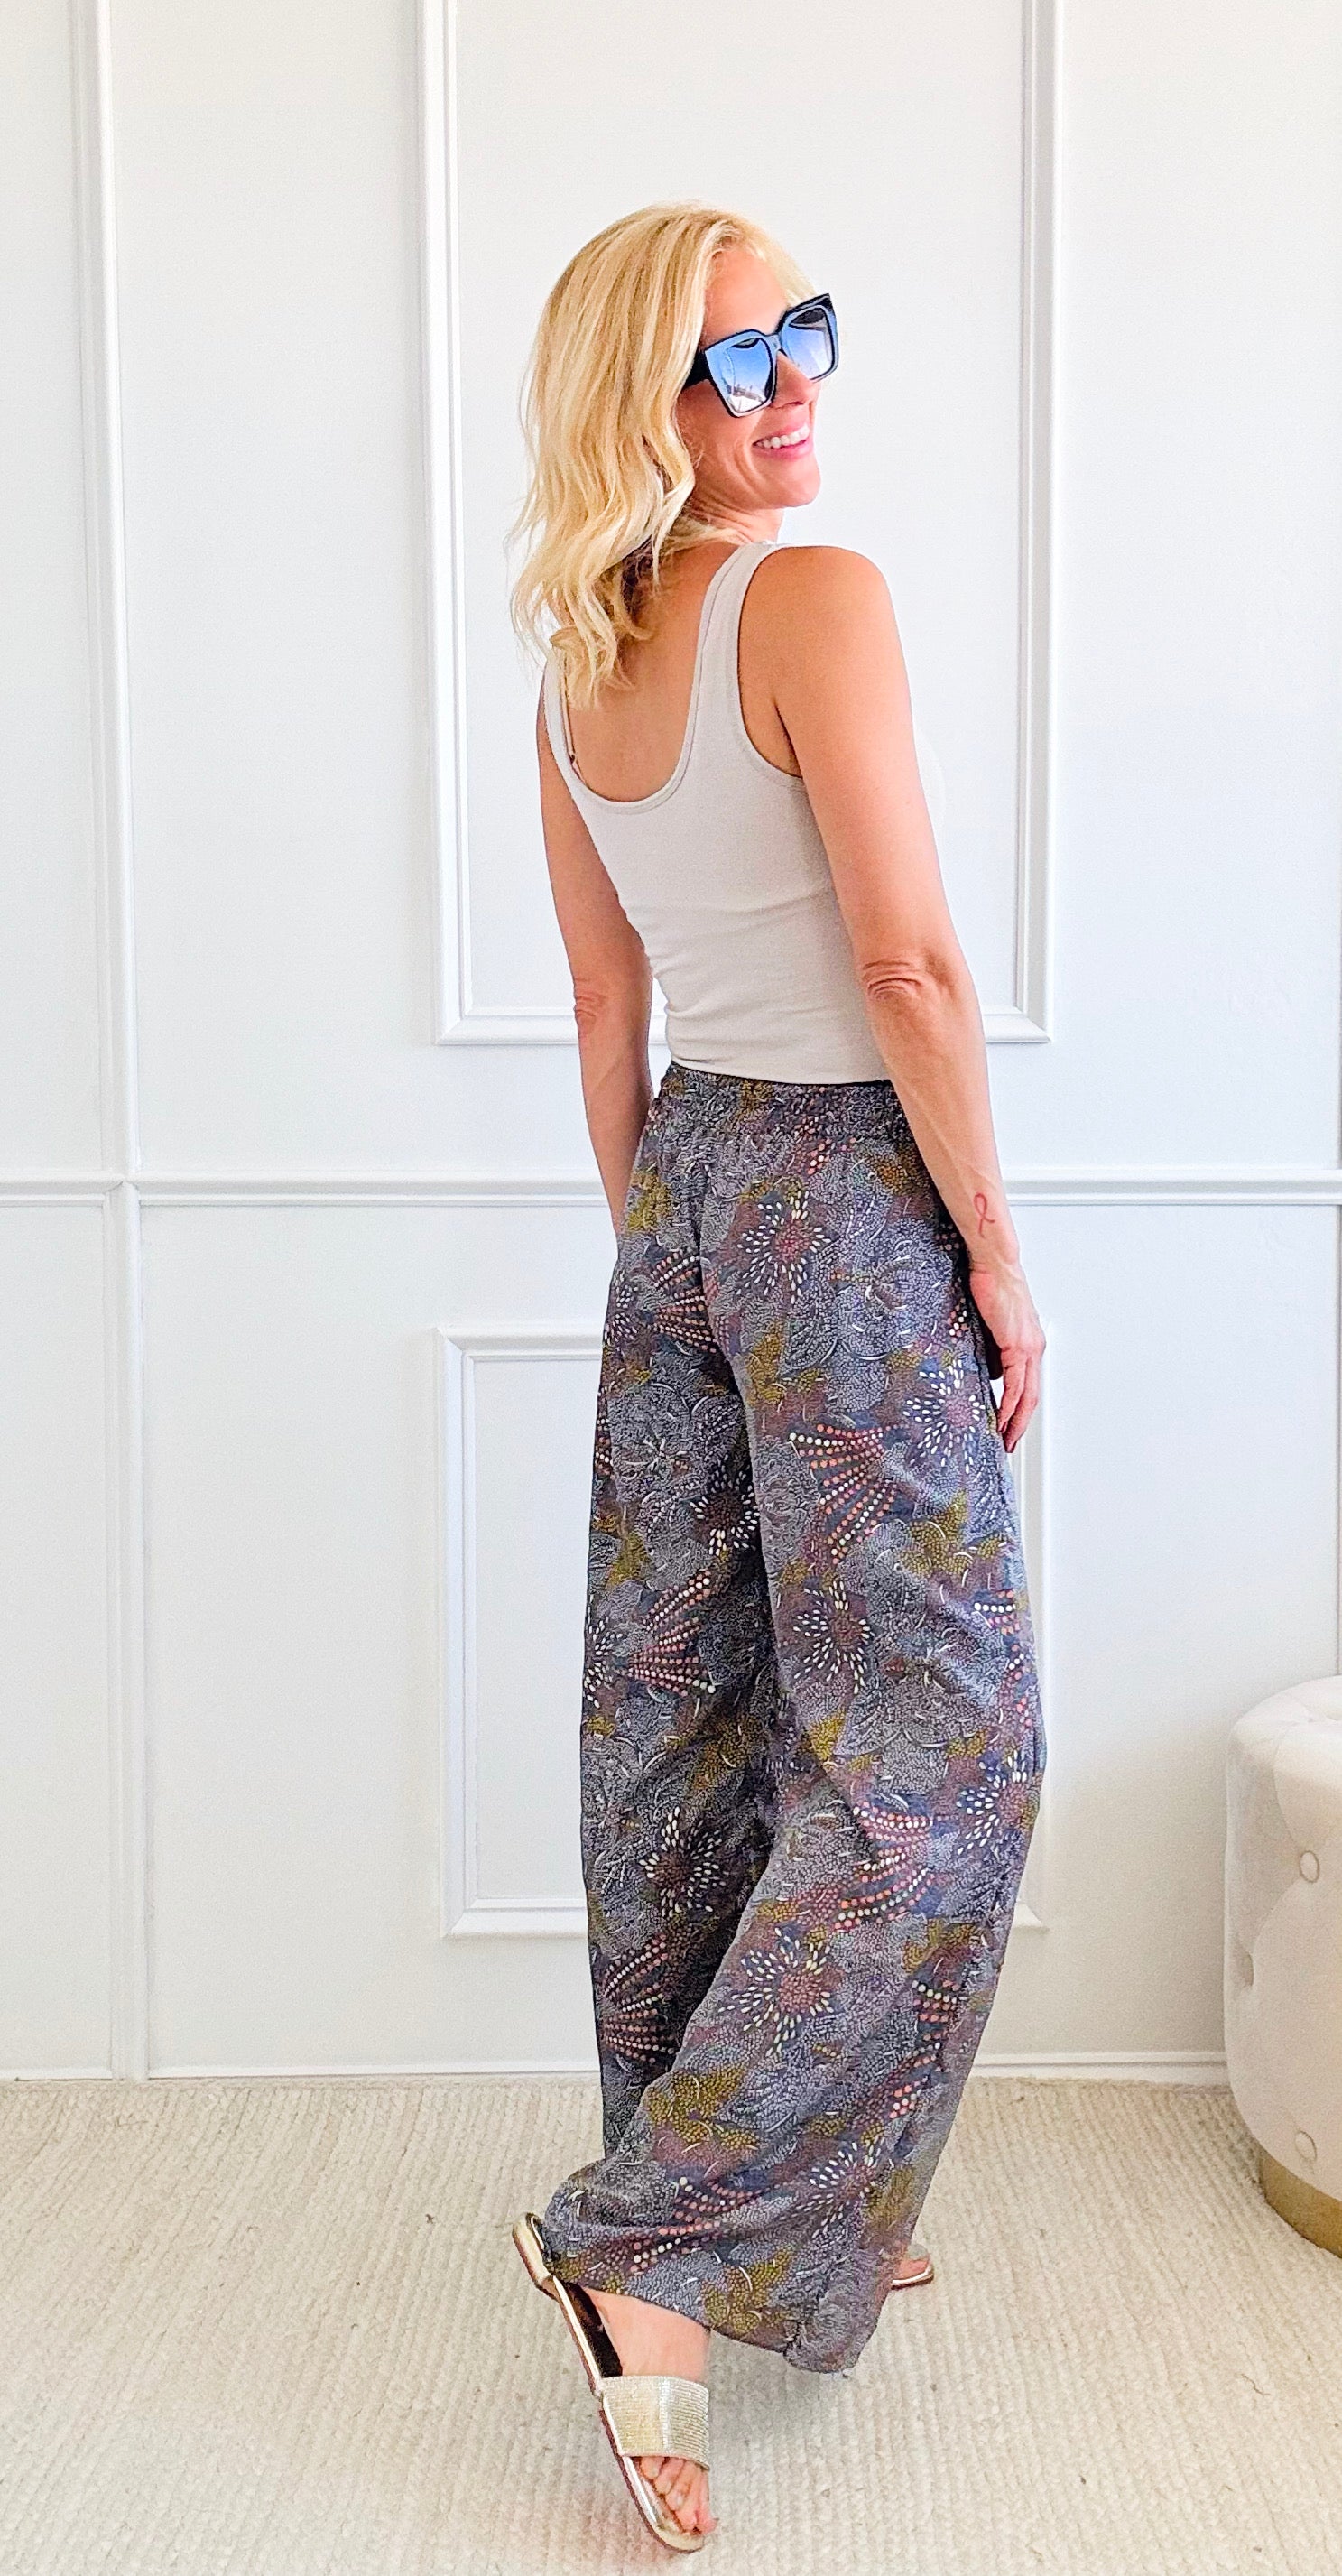 Dripping With Metallic Wrap Pants - Dark Gray-210 Loungewear/Sets-Fashion Fuse-Coastal Bloom Boutique, find the trendiest versions of the popular styles and looks Located in Indialantic, FL